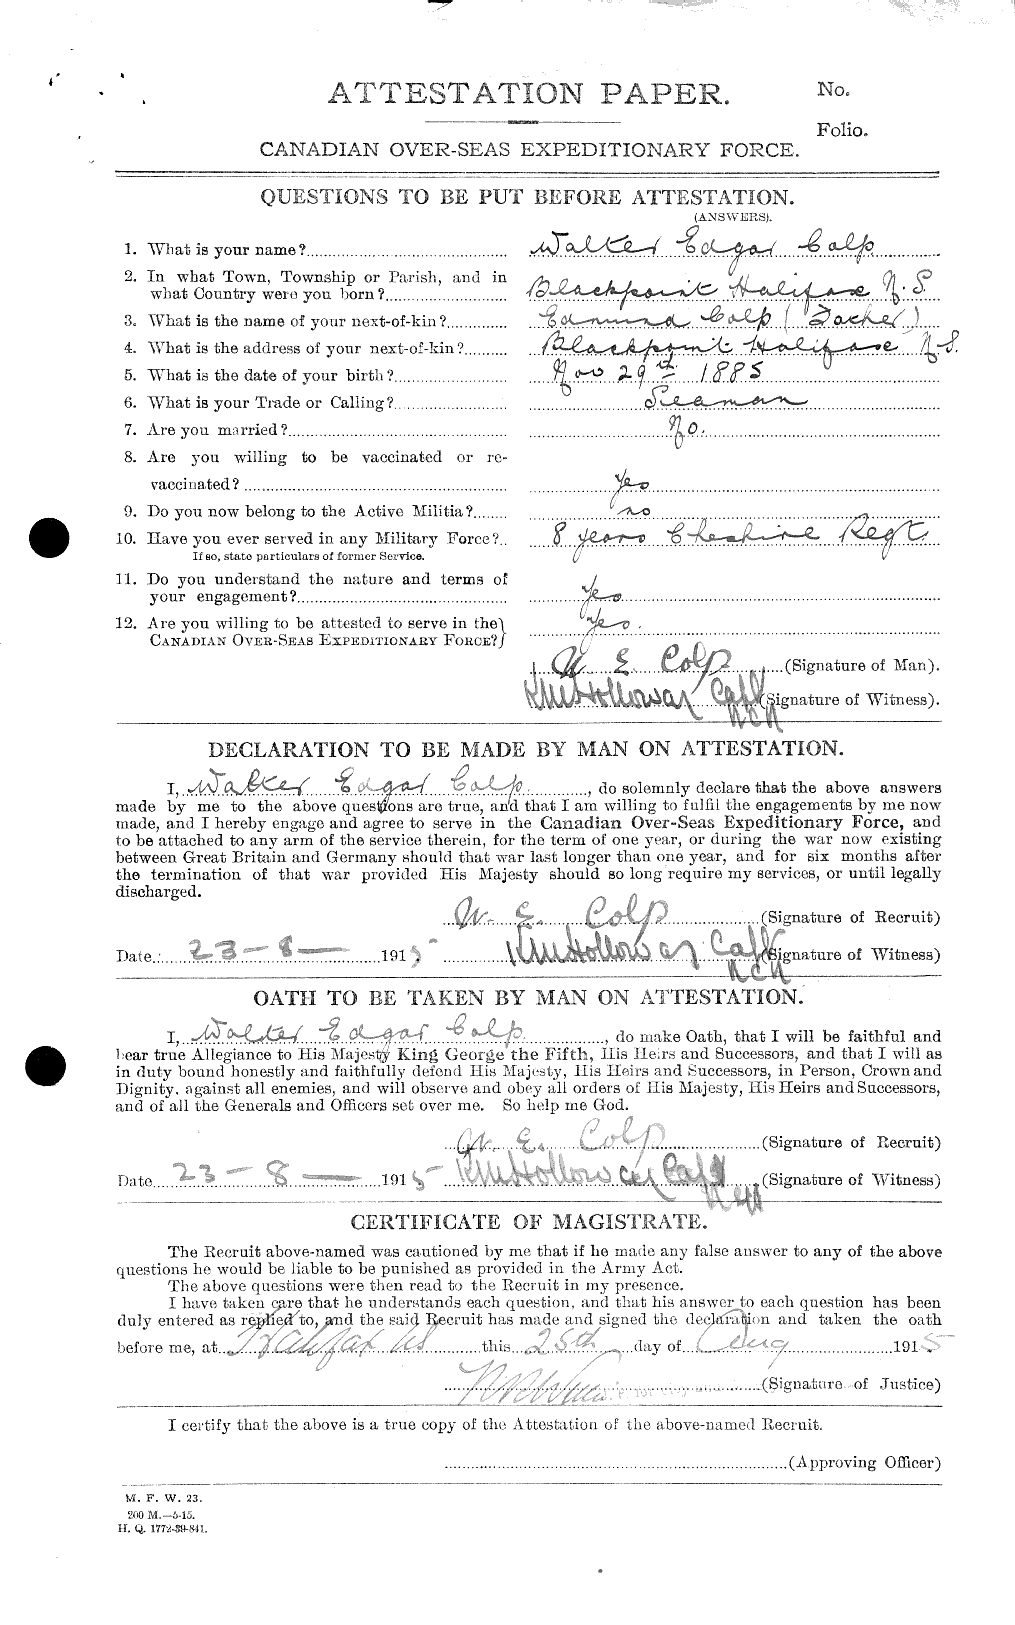 Personnel Records of the First World War - CEF 040793a